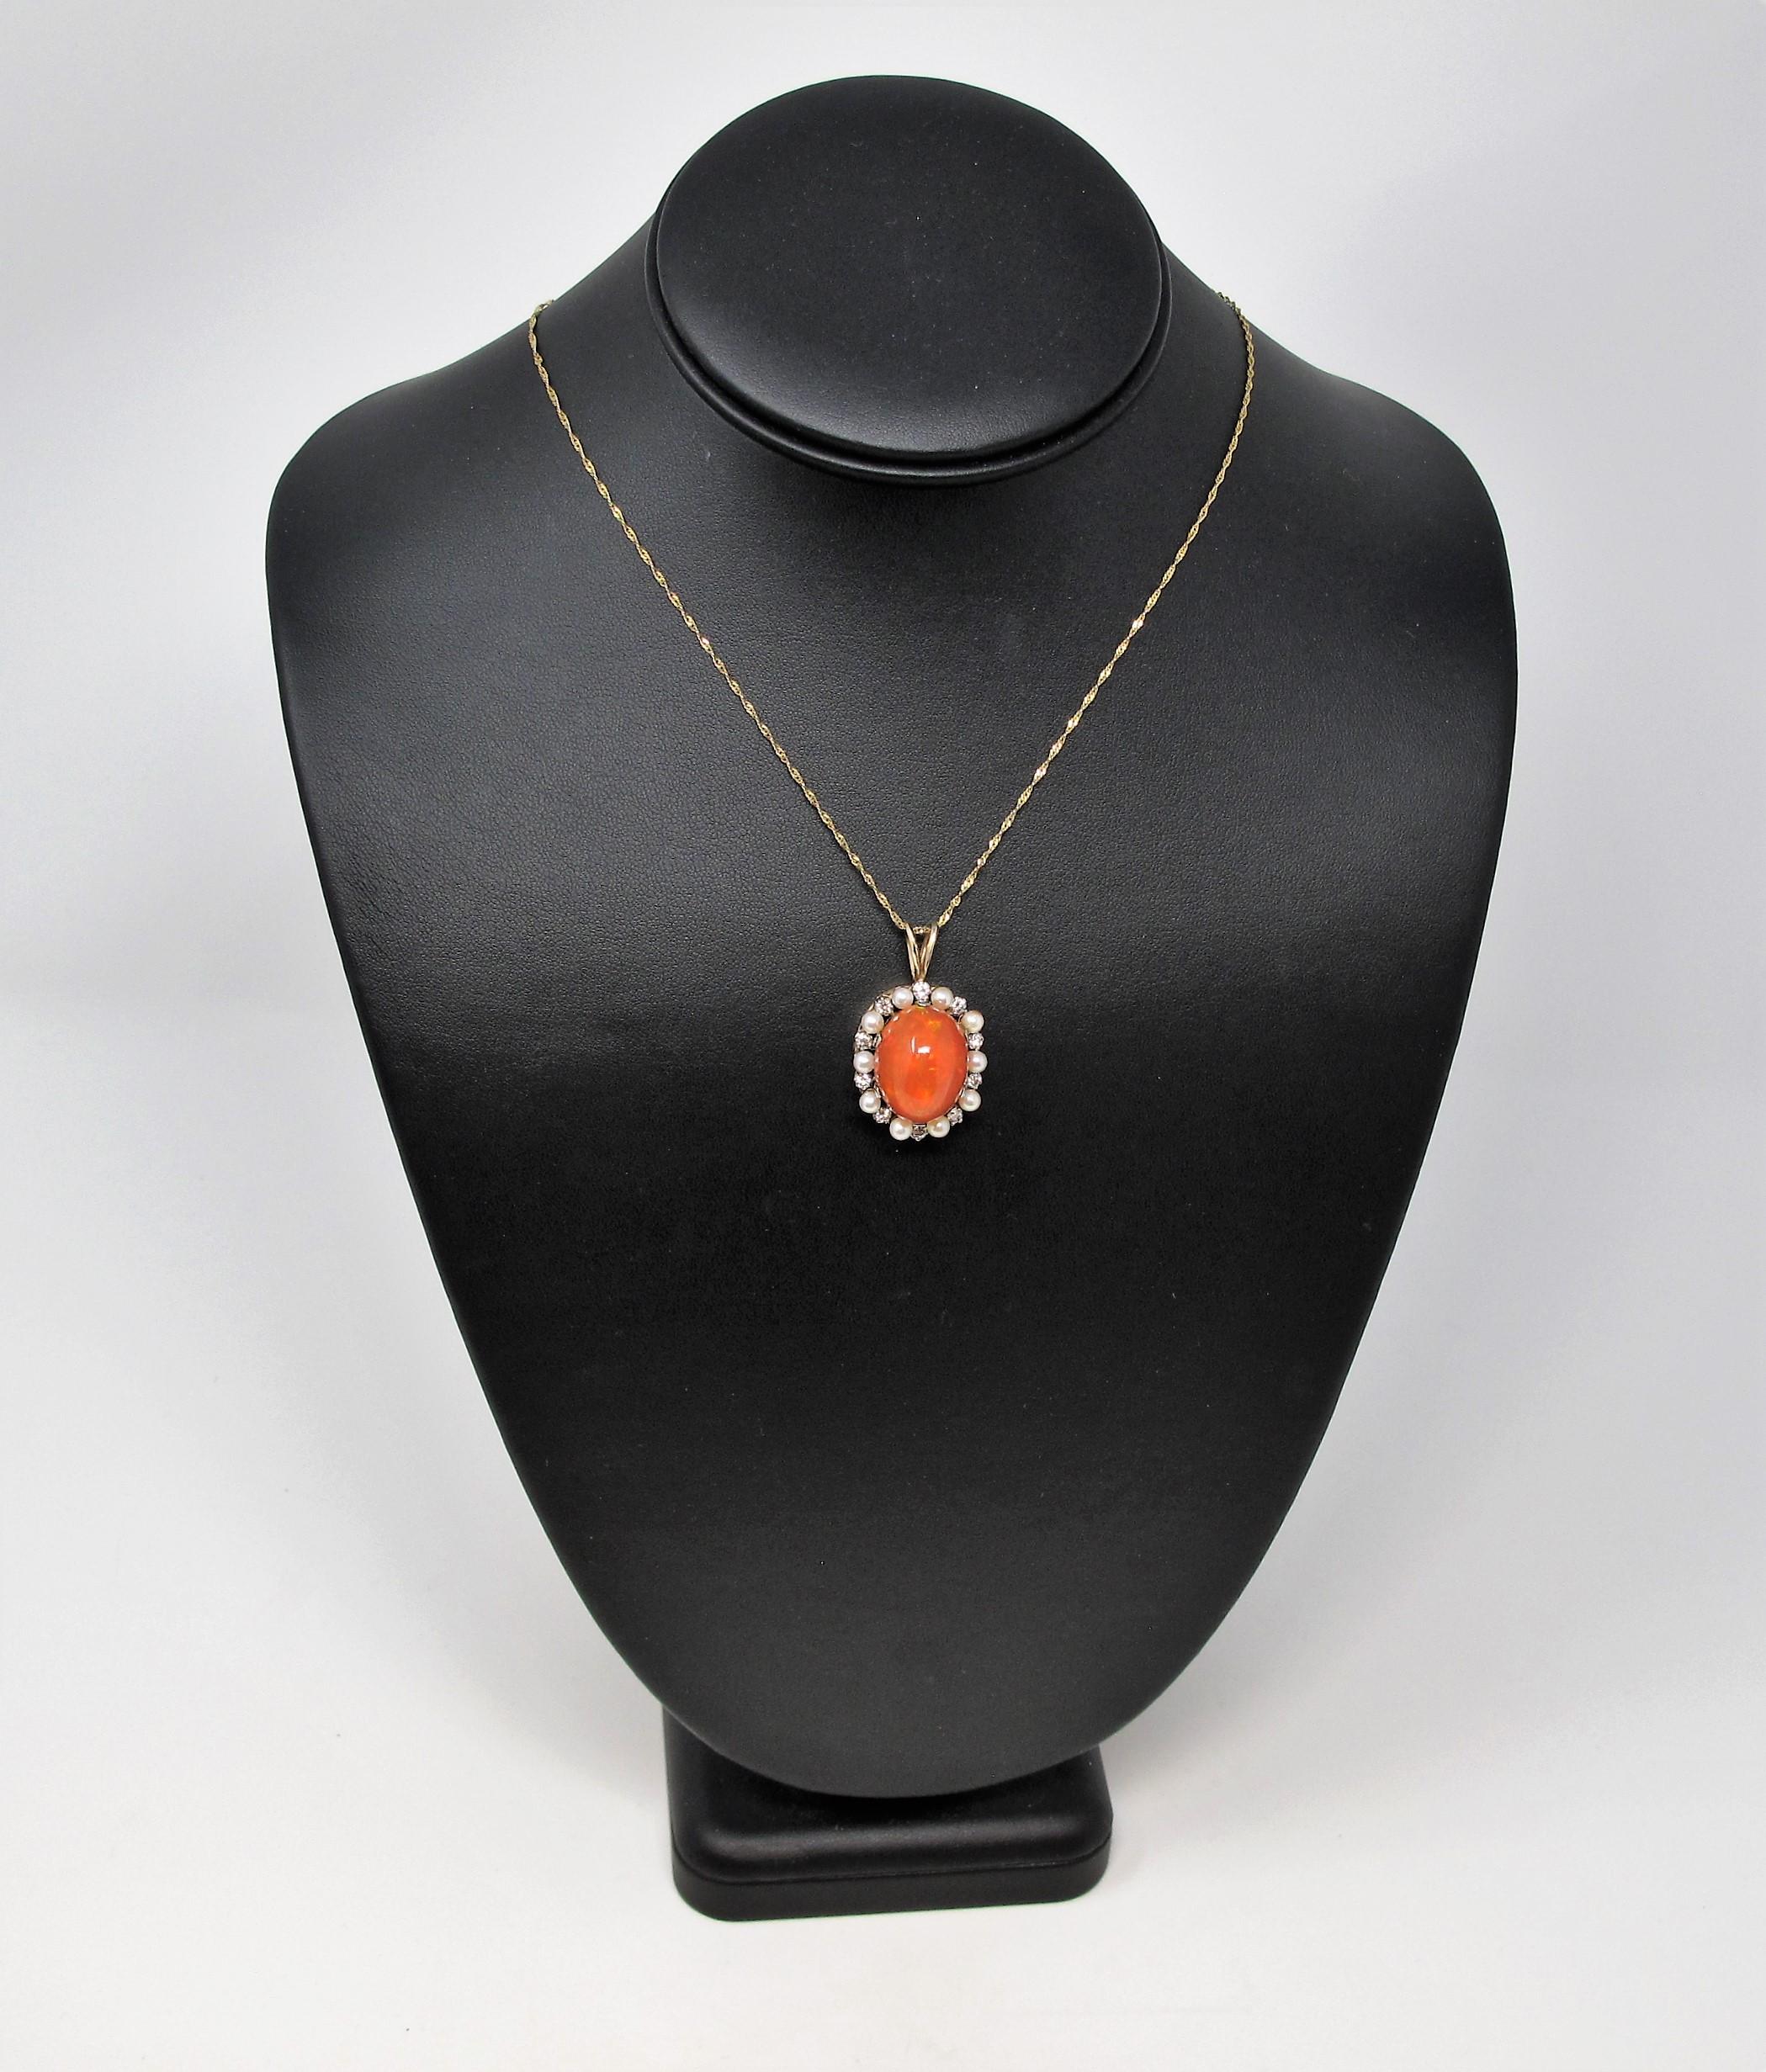 This stunningly bold fire opal pendant with diamond and pearl accents is bursting with brilliant color. Featuring a high polished orangey-red fire opal stone, this gleaming pendant shimmers beautifully in the light, displaying its wide play of